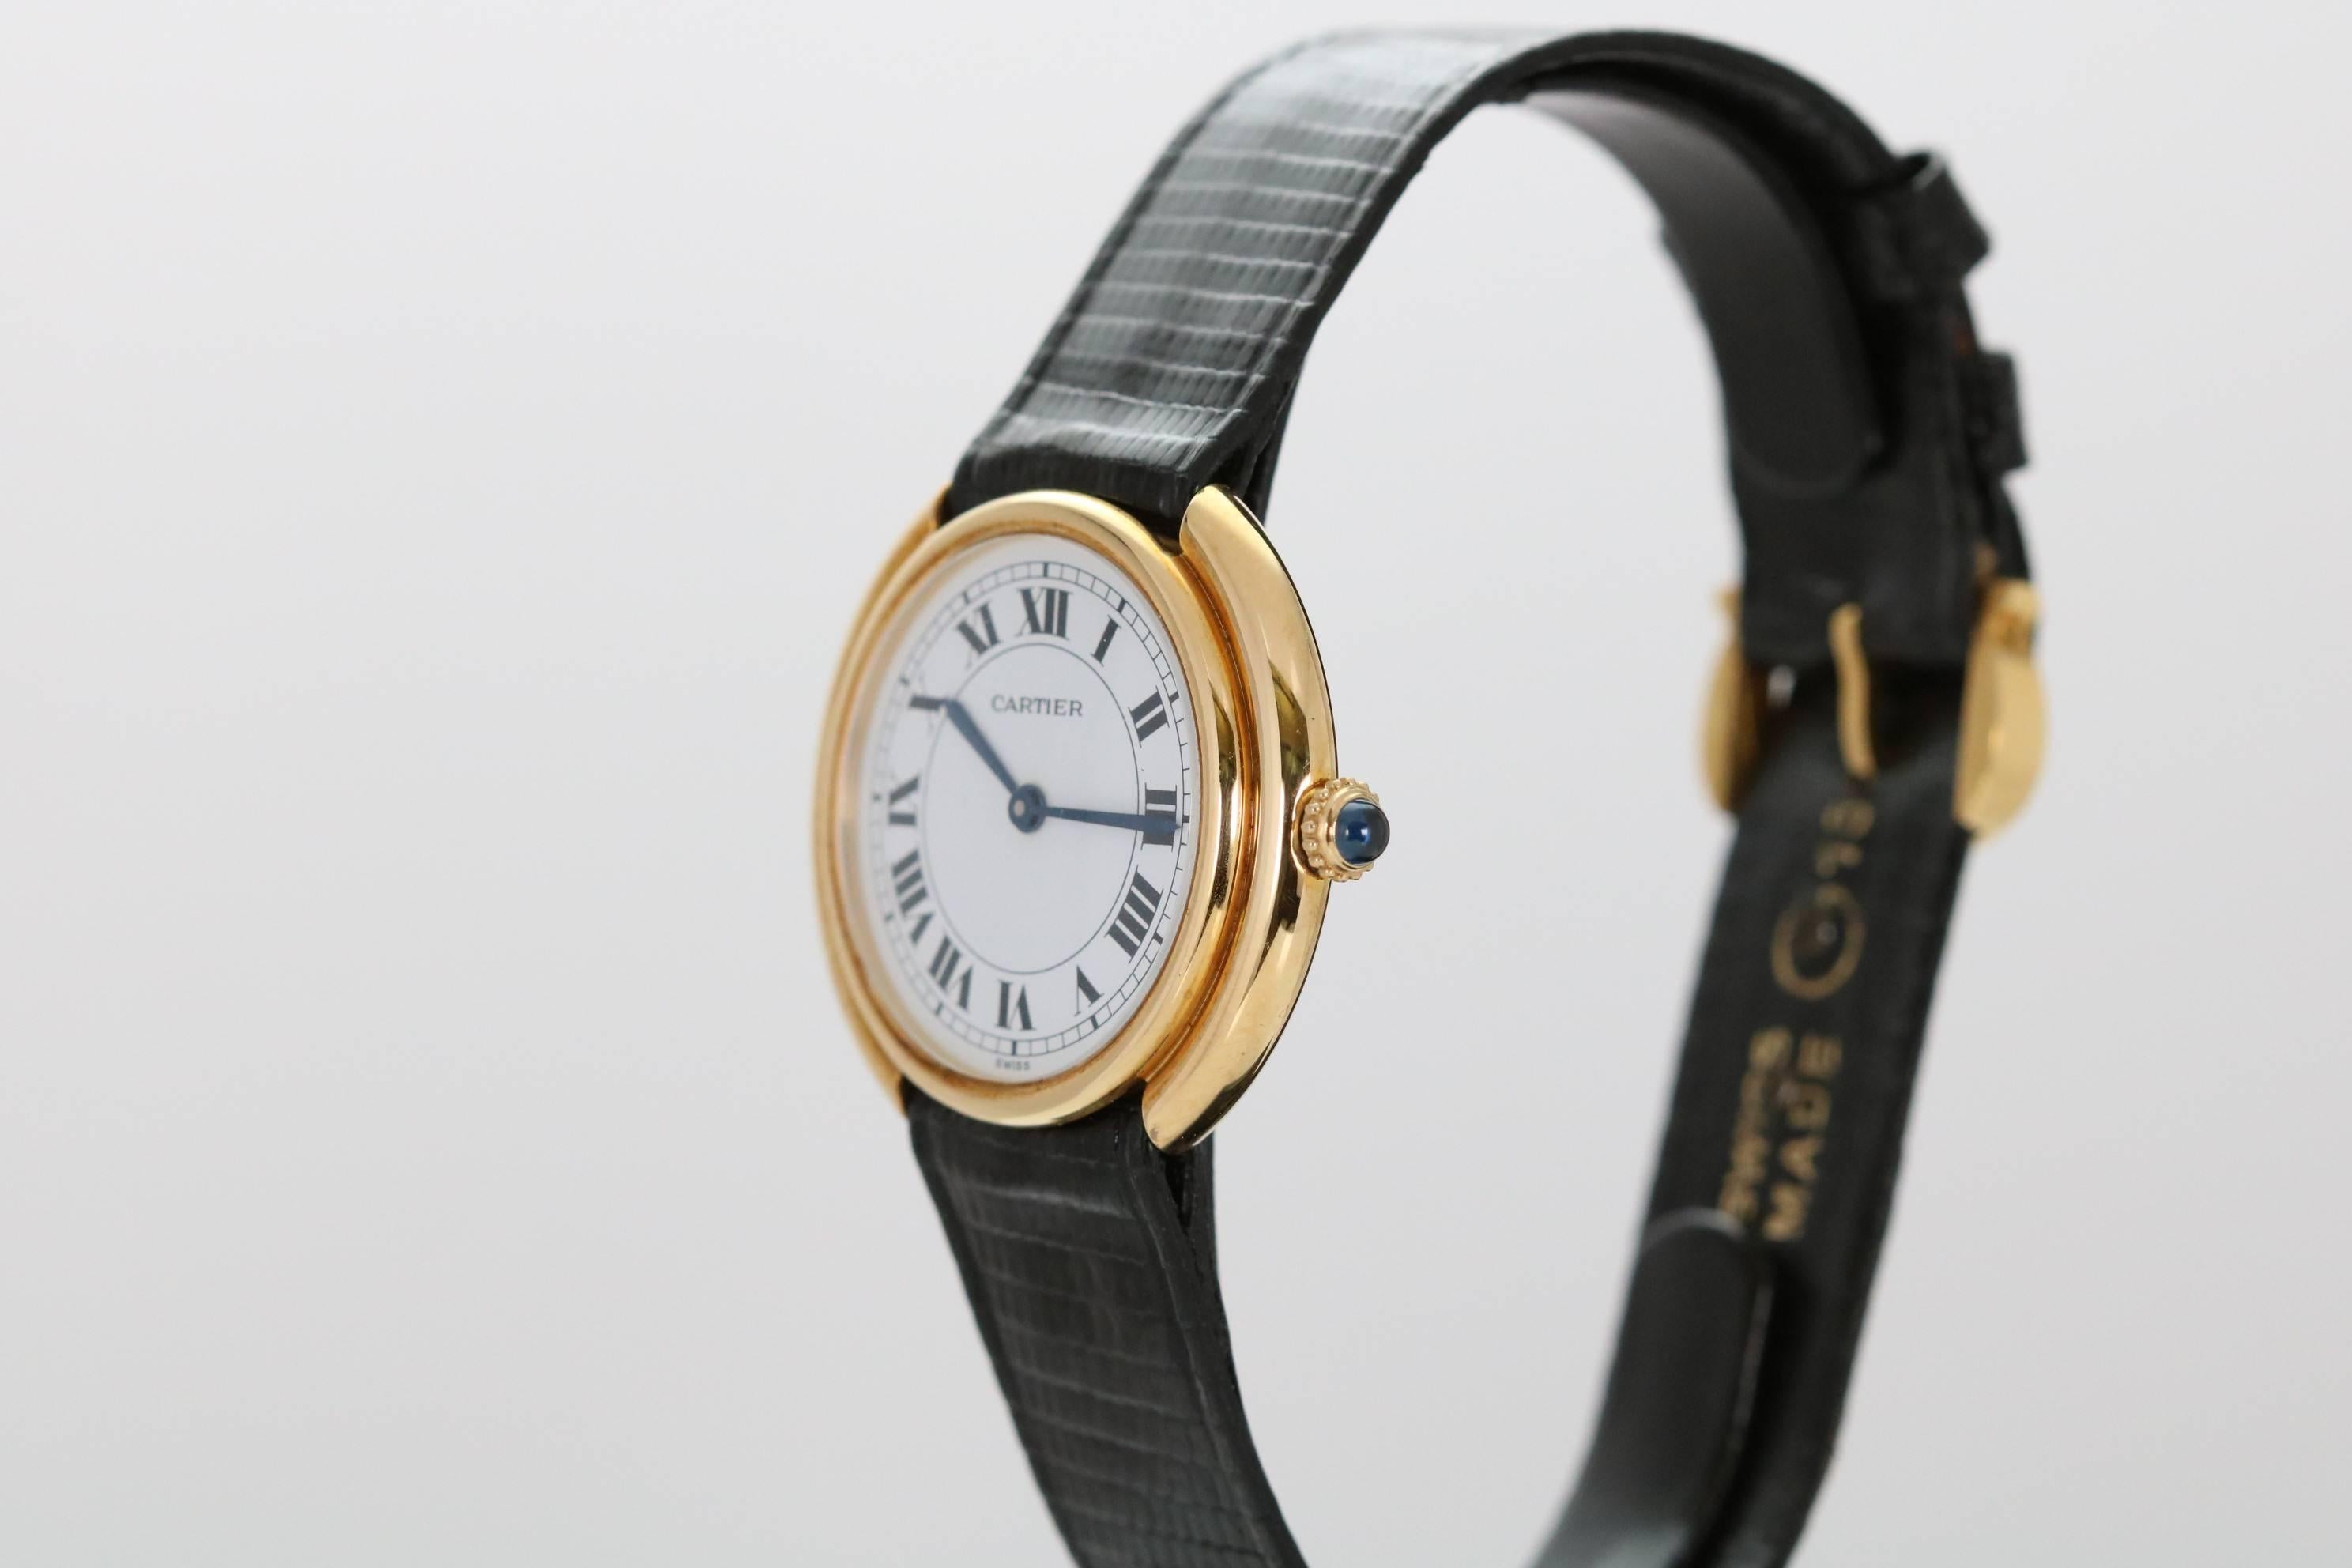 This is a elegant Cartier oval stepped case with an automatic movement and is on a Cartier strap and tank buckle.
